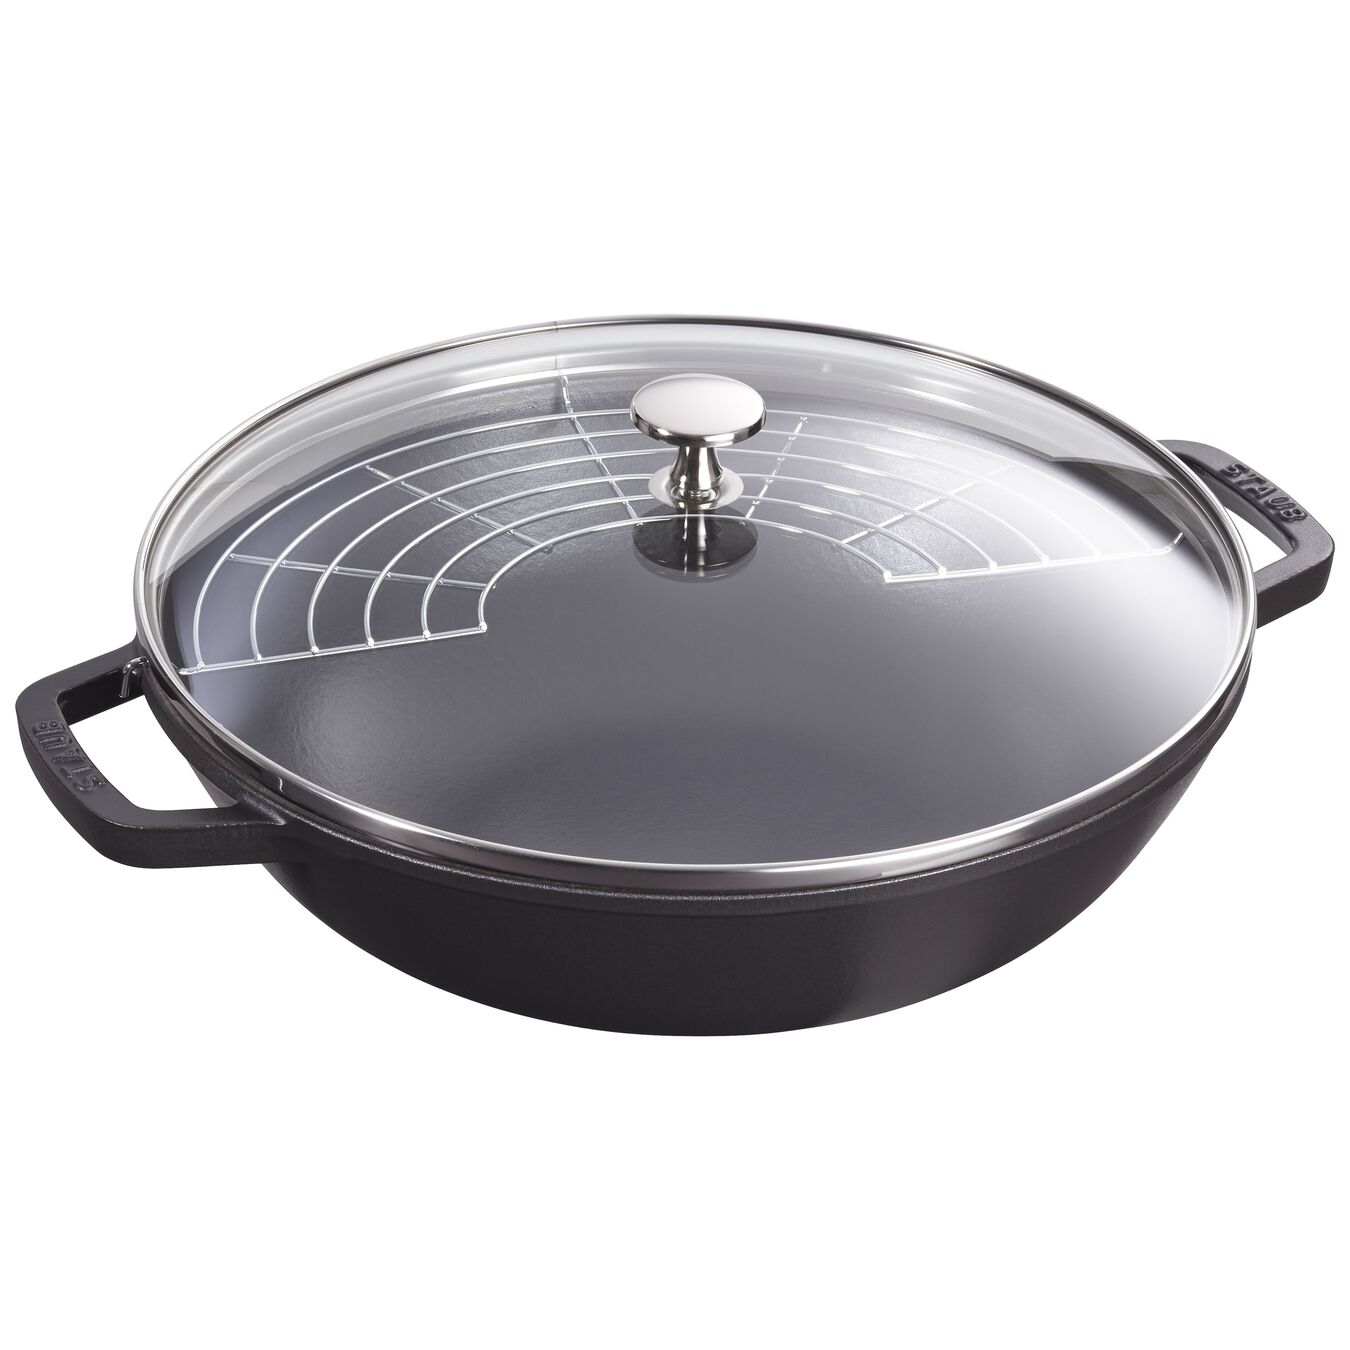 30 cm / 12 inch cast iron Wok with glass lid, black - Visual Imperfections,,large 2